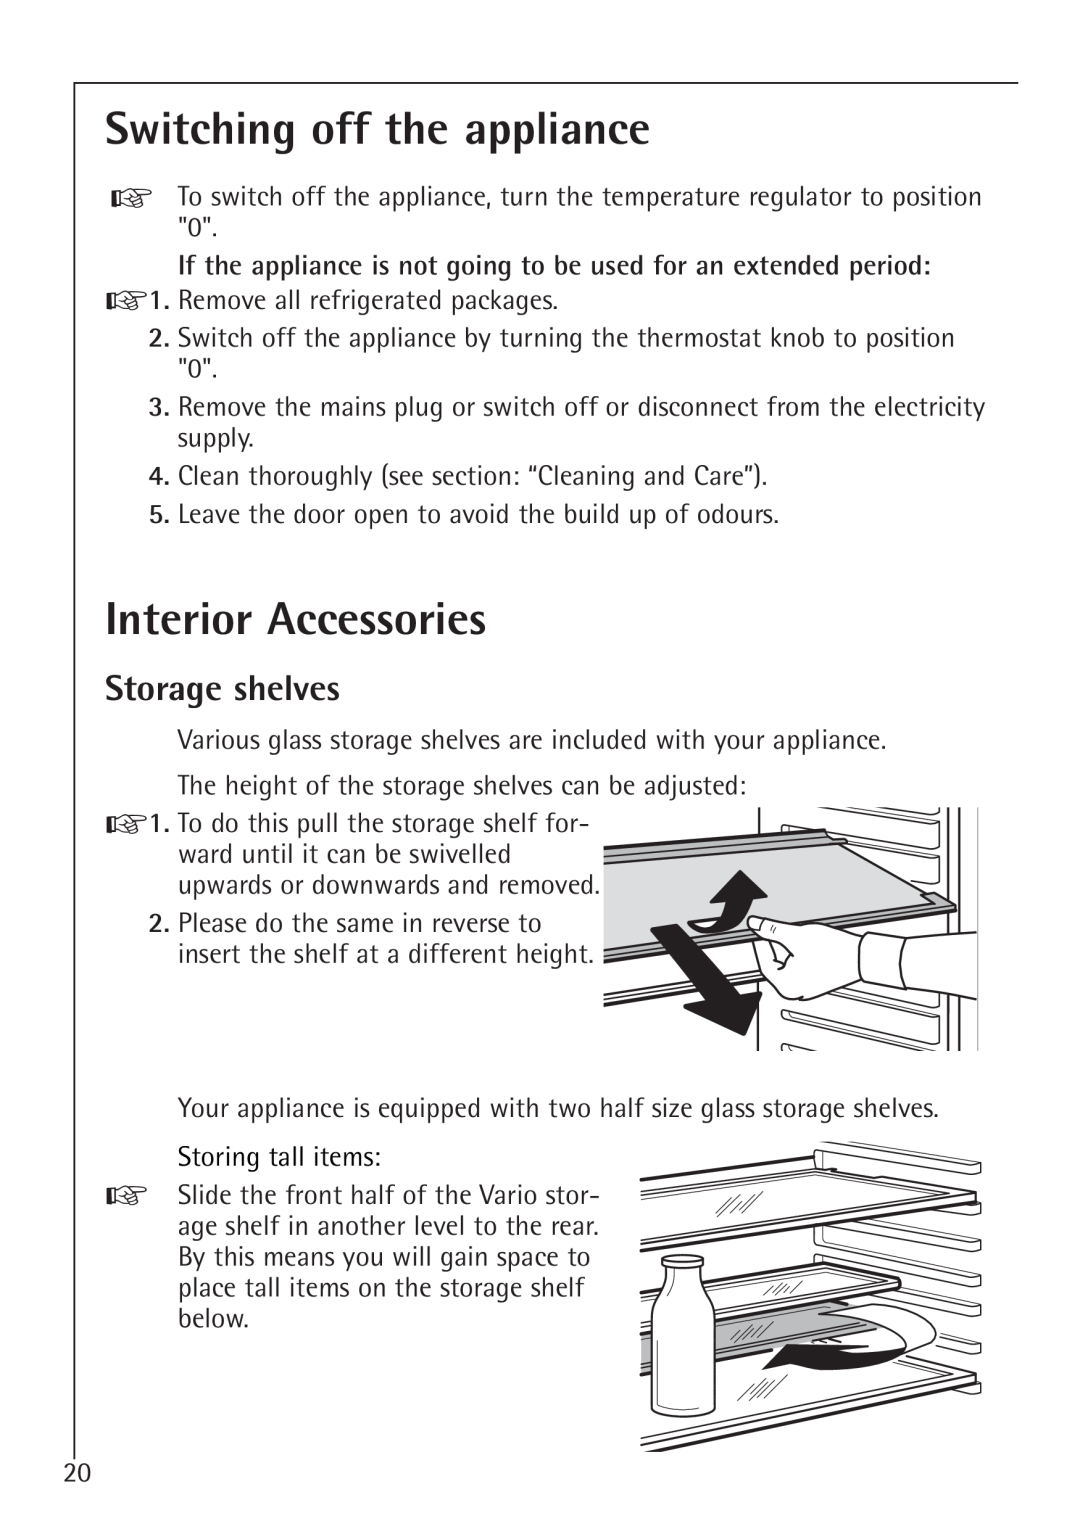 Electrolux 86000 i installation instructions Switching off the appliance, Interior Accessories, Storage shelves 